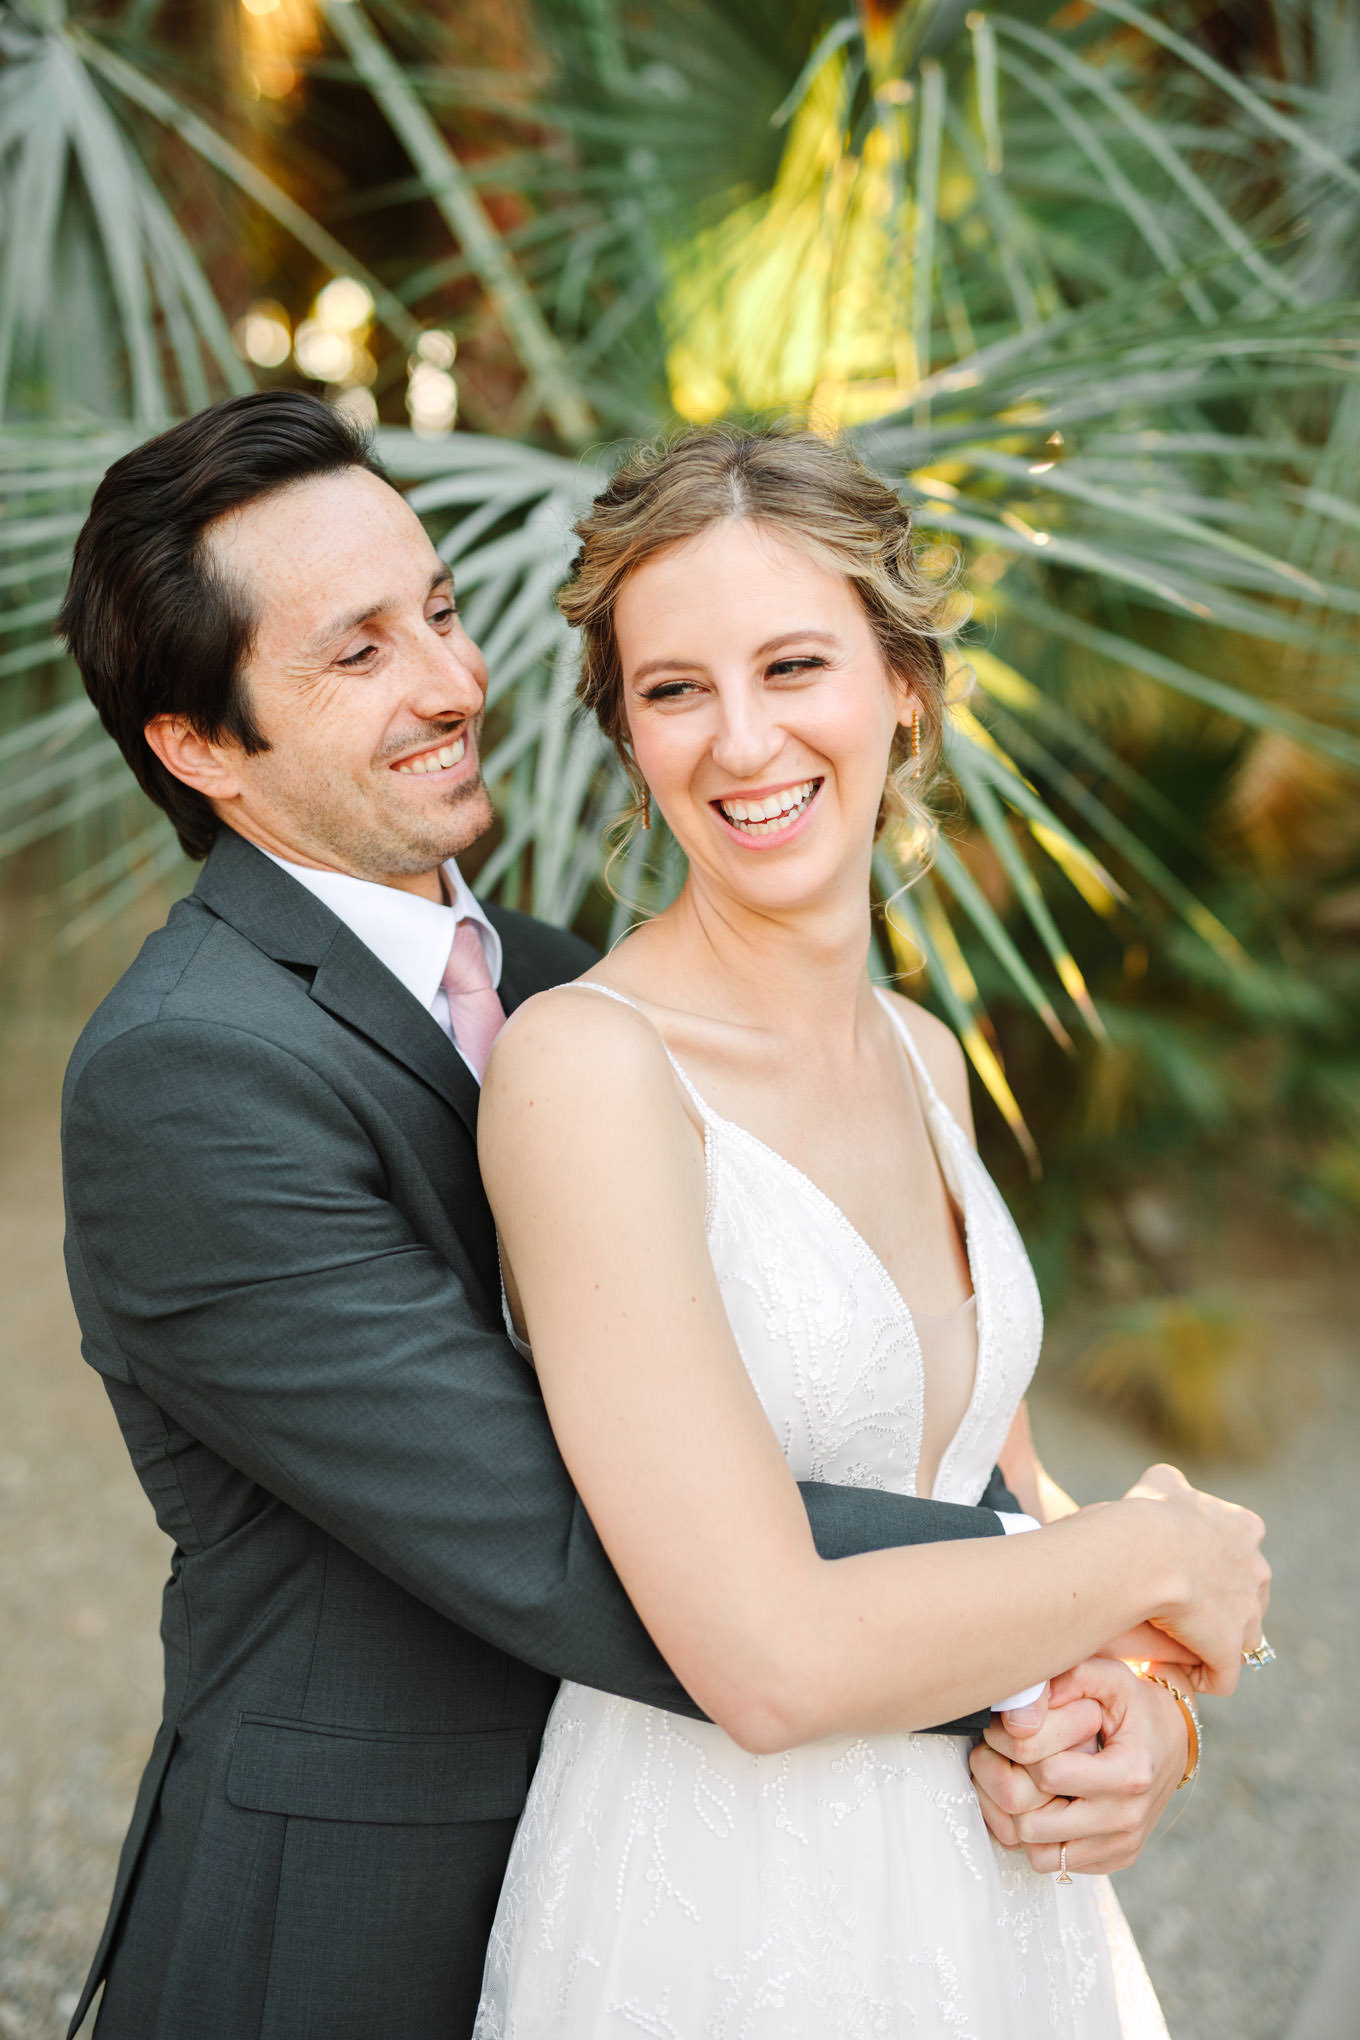 Wedding portrait of bride and groom | Living Desert Zoo & Gardens wedding with unique details | Elevated and colorful wedding photography for fun-loving couples in Southern California |  #PalmSprings #palmspringsphotographer #gardenwedding #palmspringswedding  Source: Mary Costa Photography | Los Angeles wedding photographer 